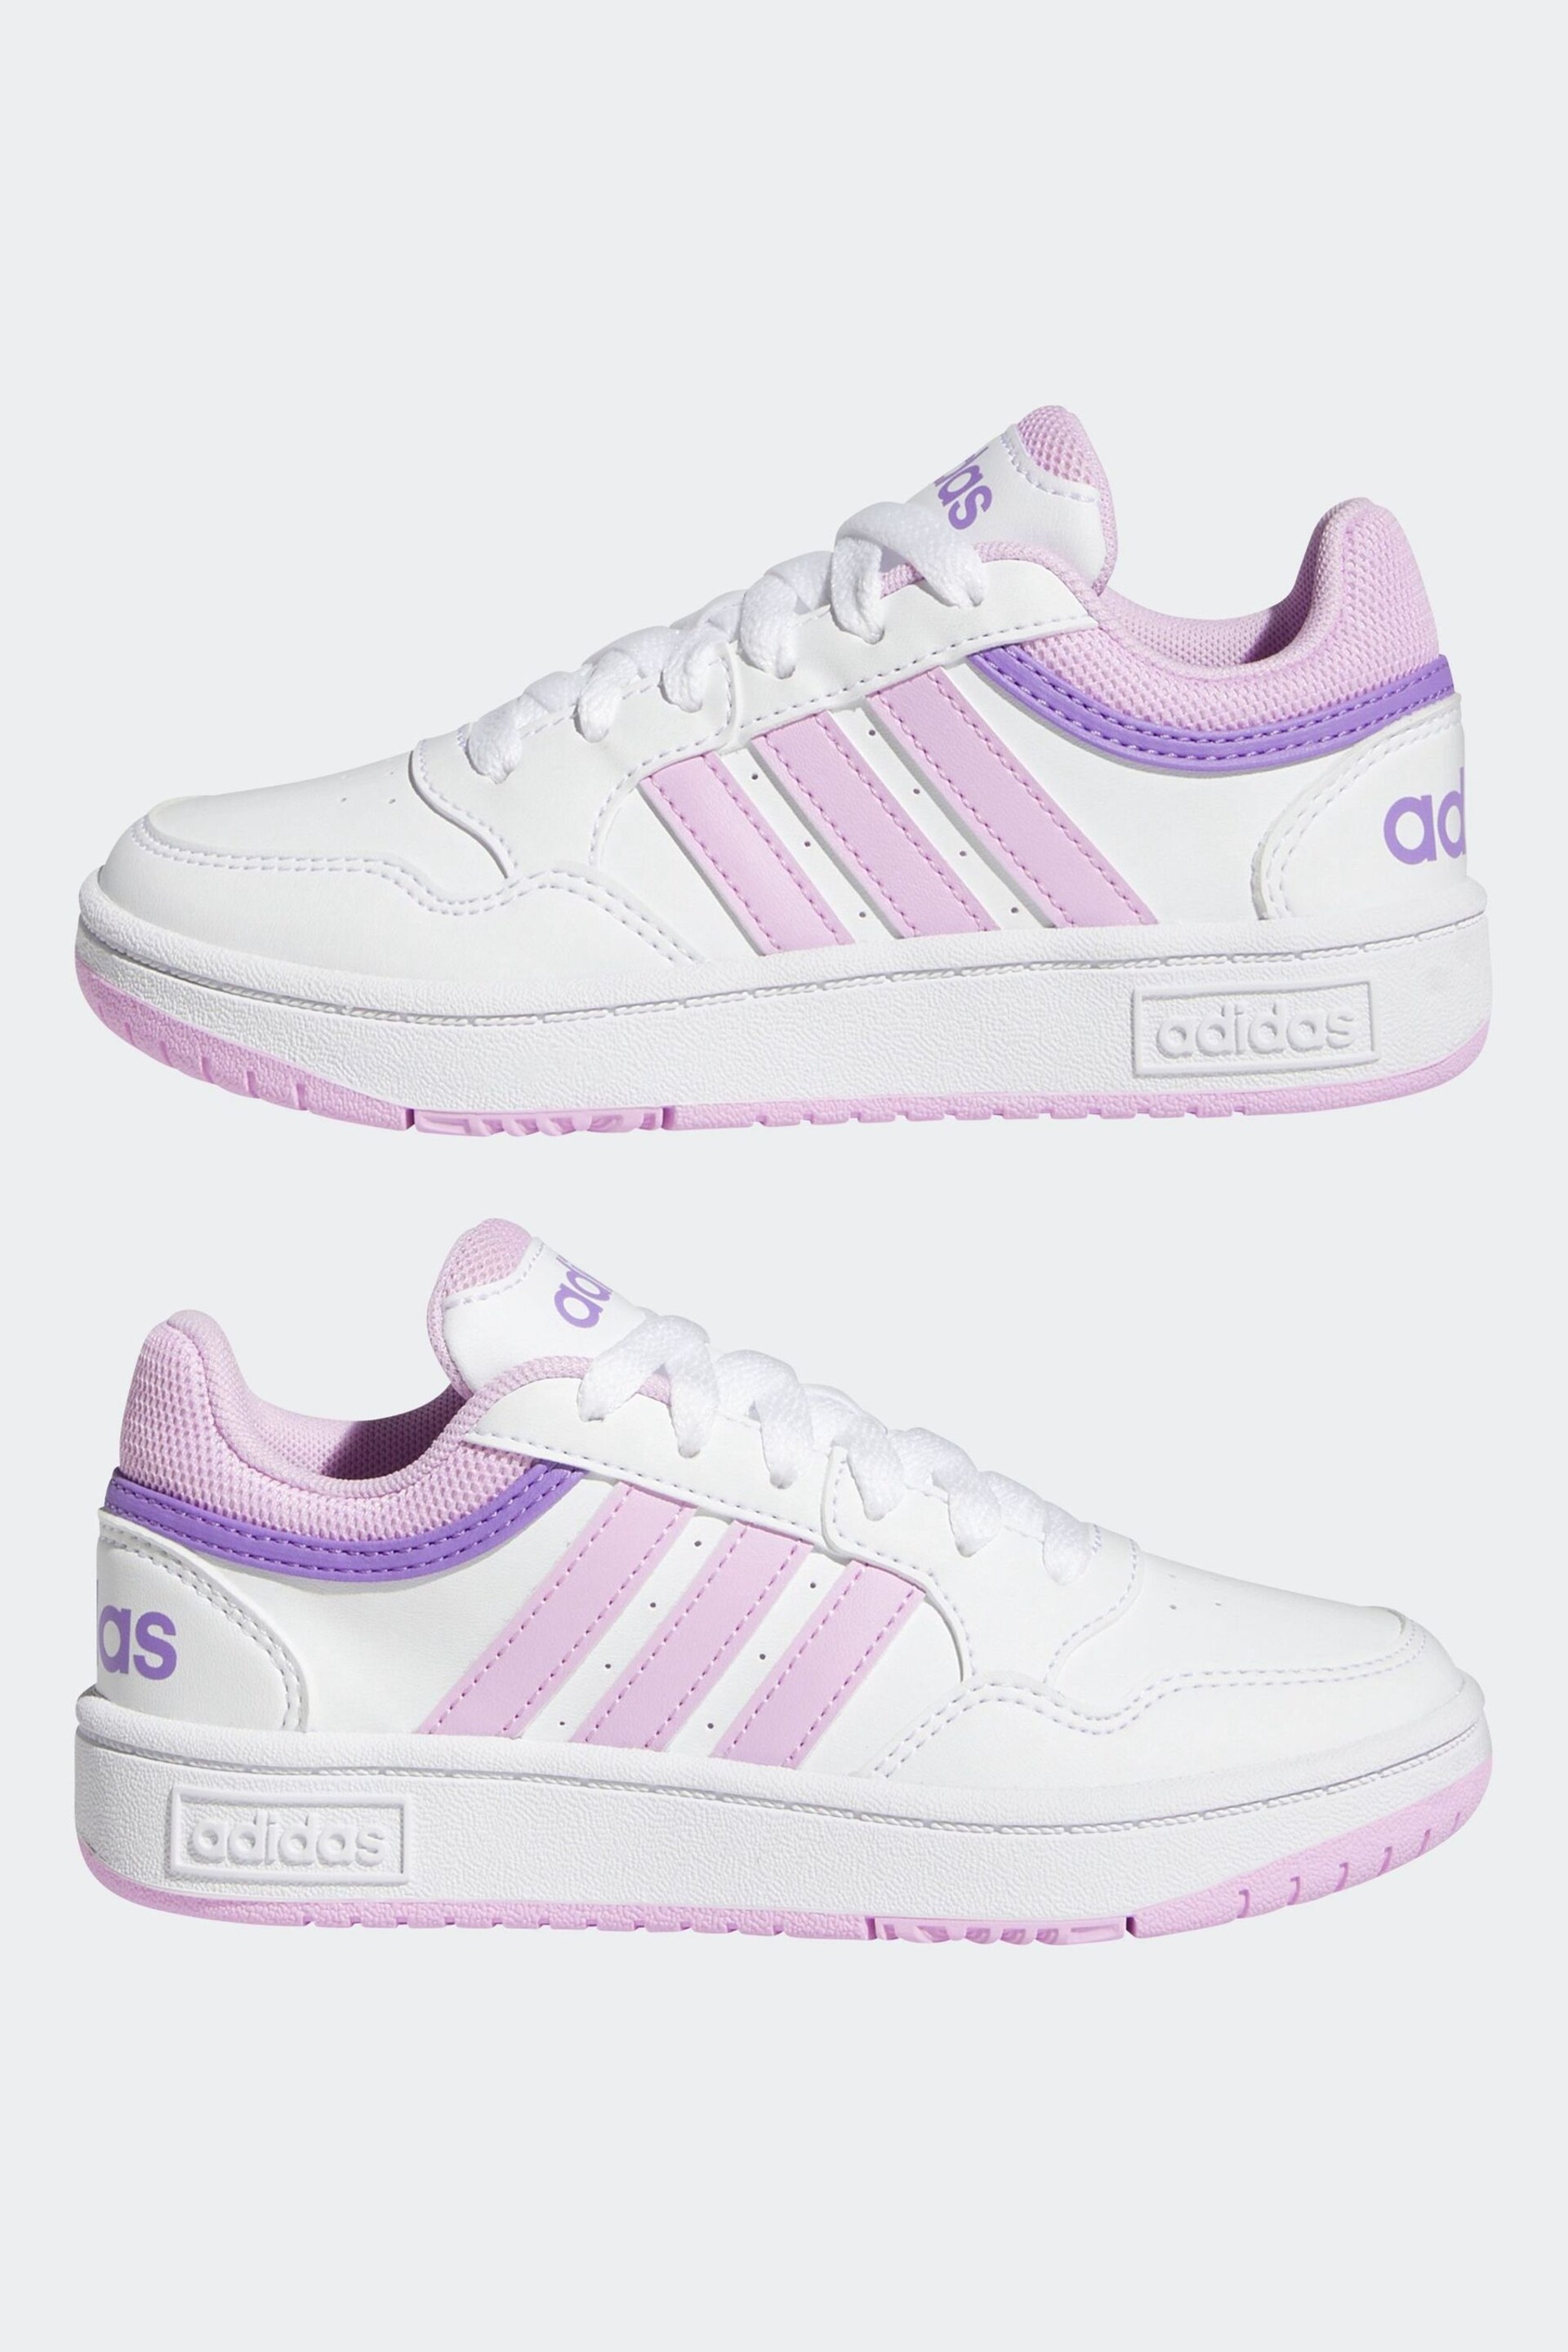 adidas White/purple Hoops Trainers - Image 4 of 9